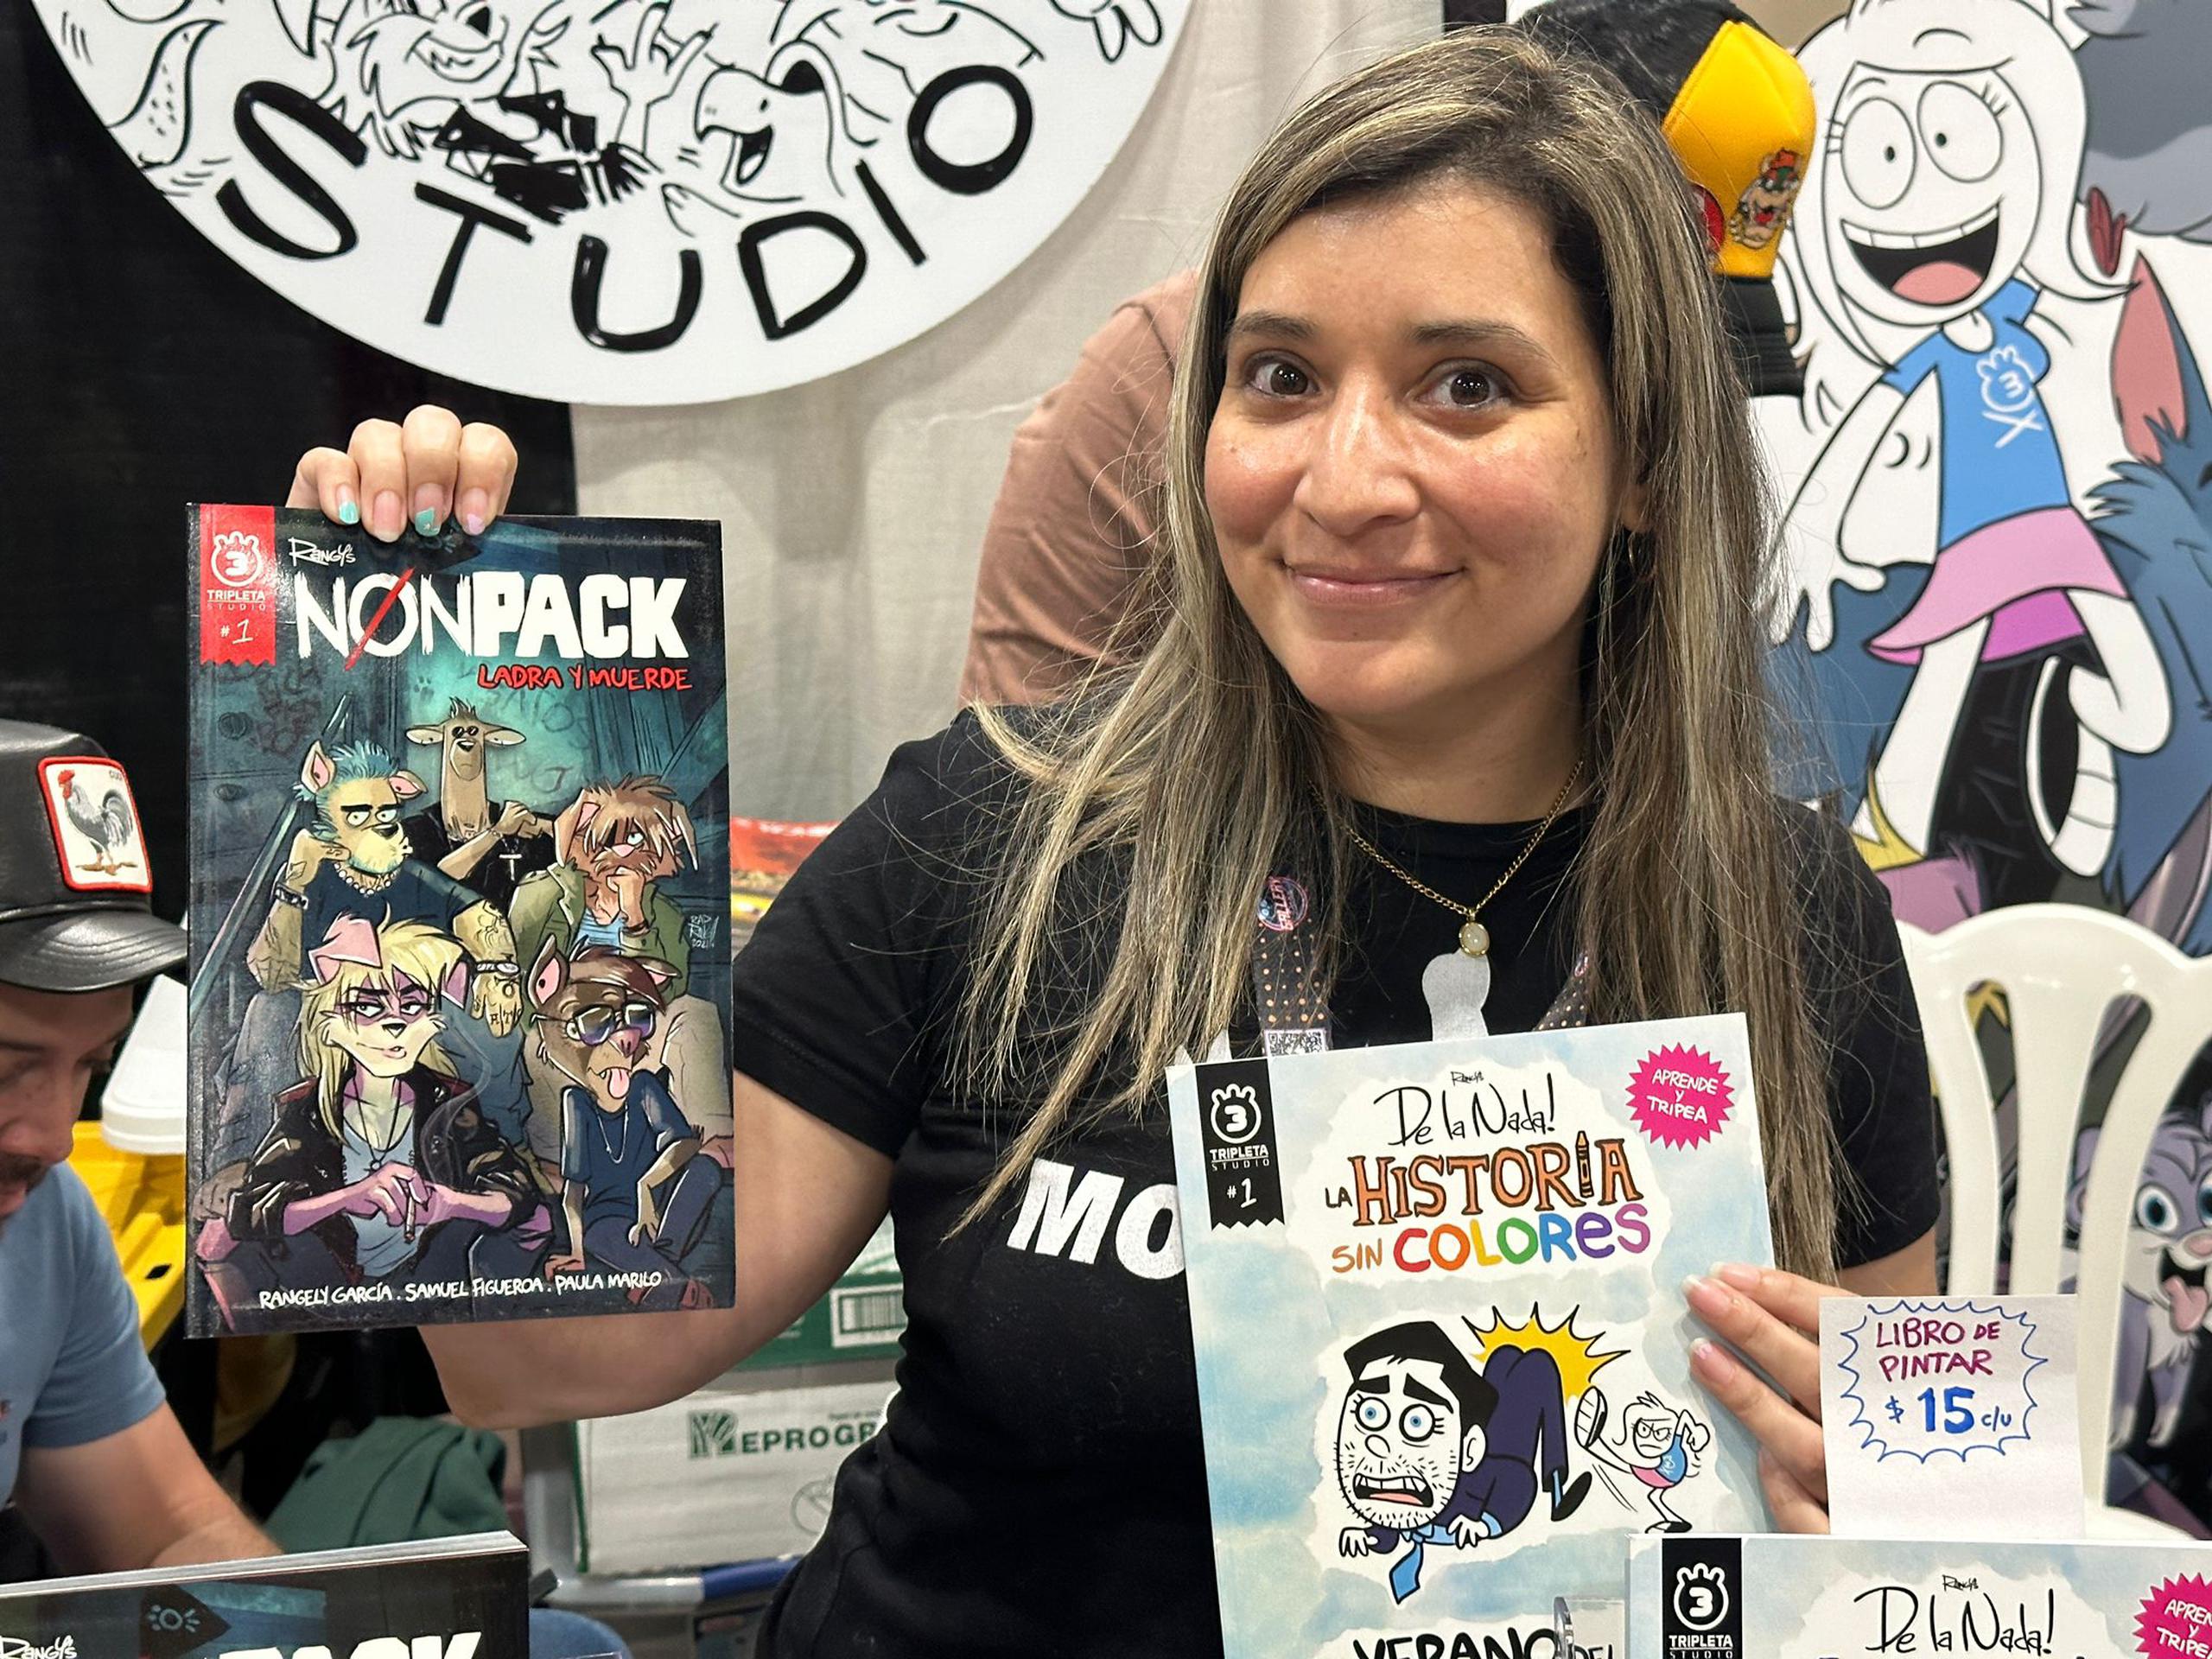 Rangely Garcia Colon enjoys seeing her growth as an artist at the famous convention.